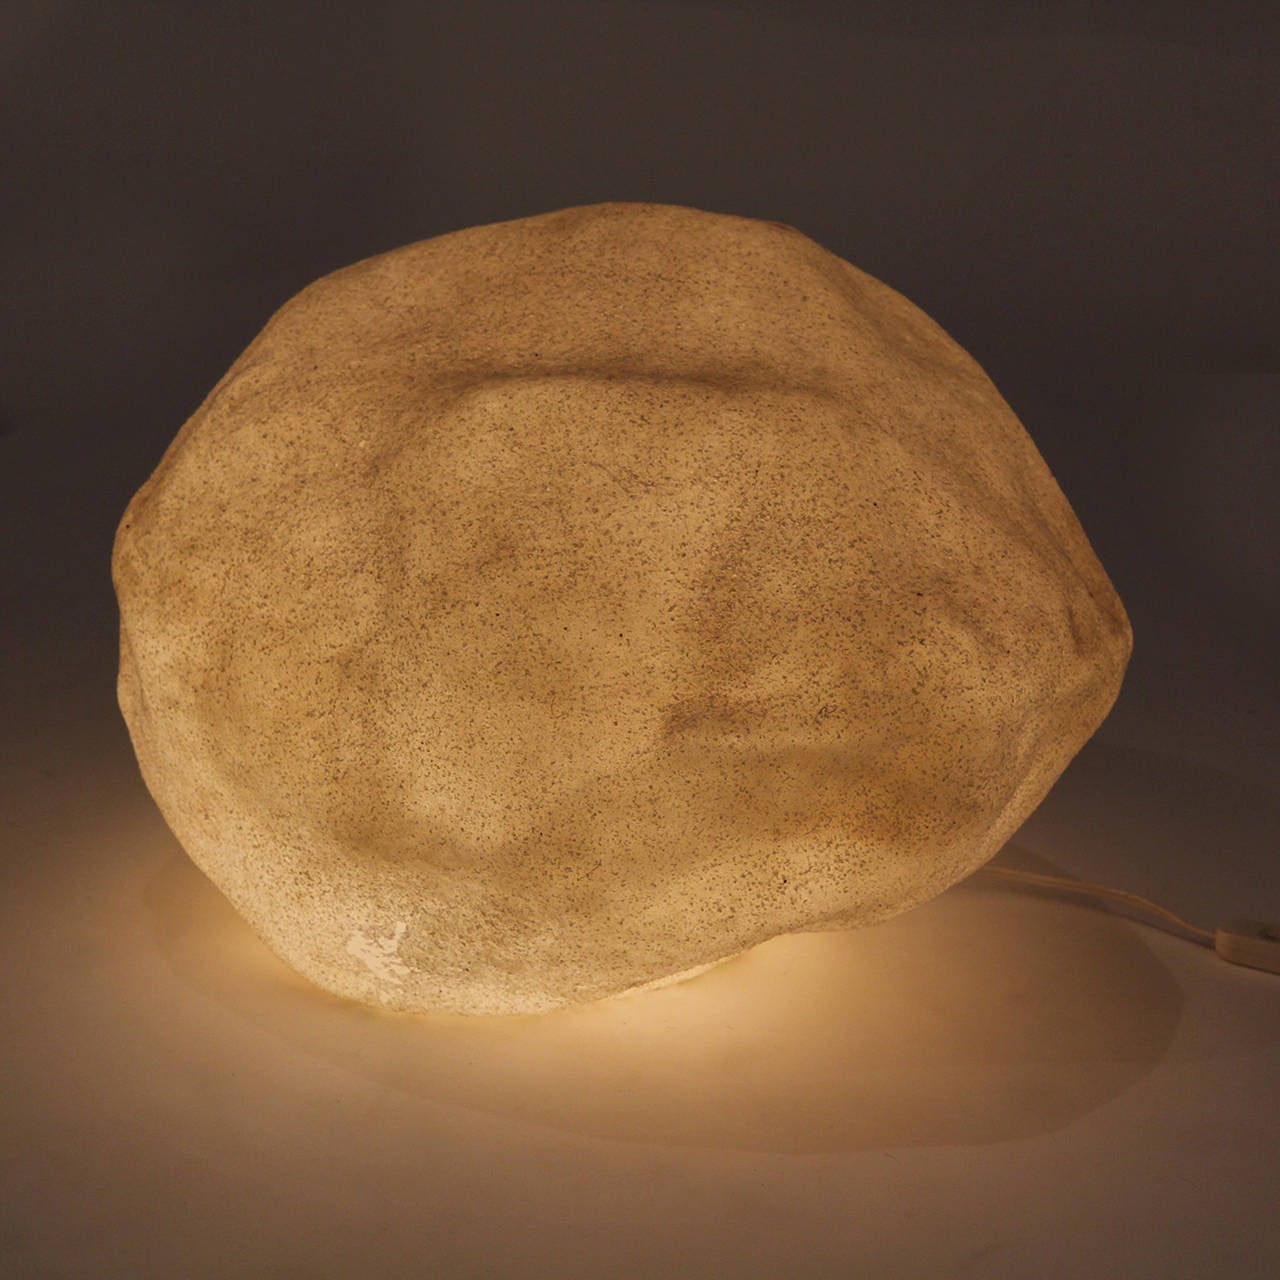 A group of naturalistic lamps having the form of natural stones, masterfully rendered in textured resin. The lamps emit a warm glow when lit.